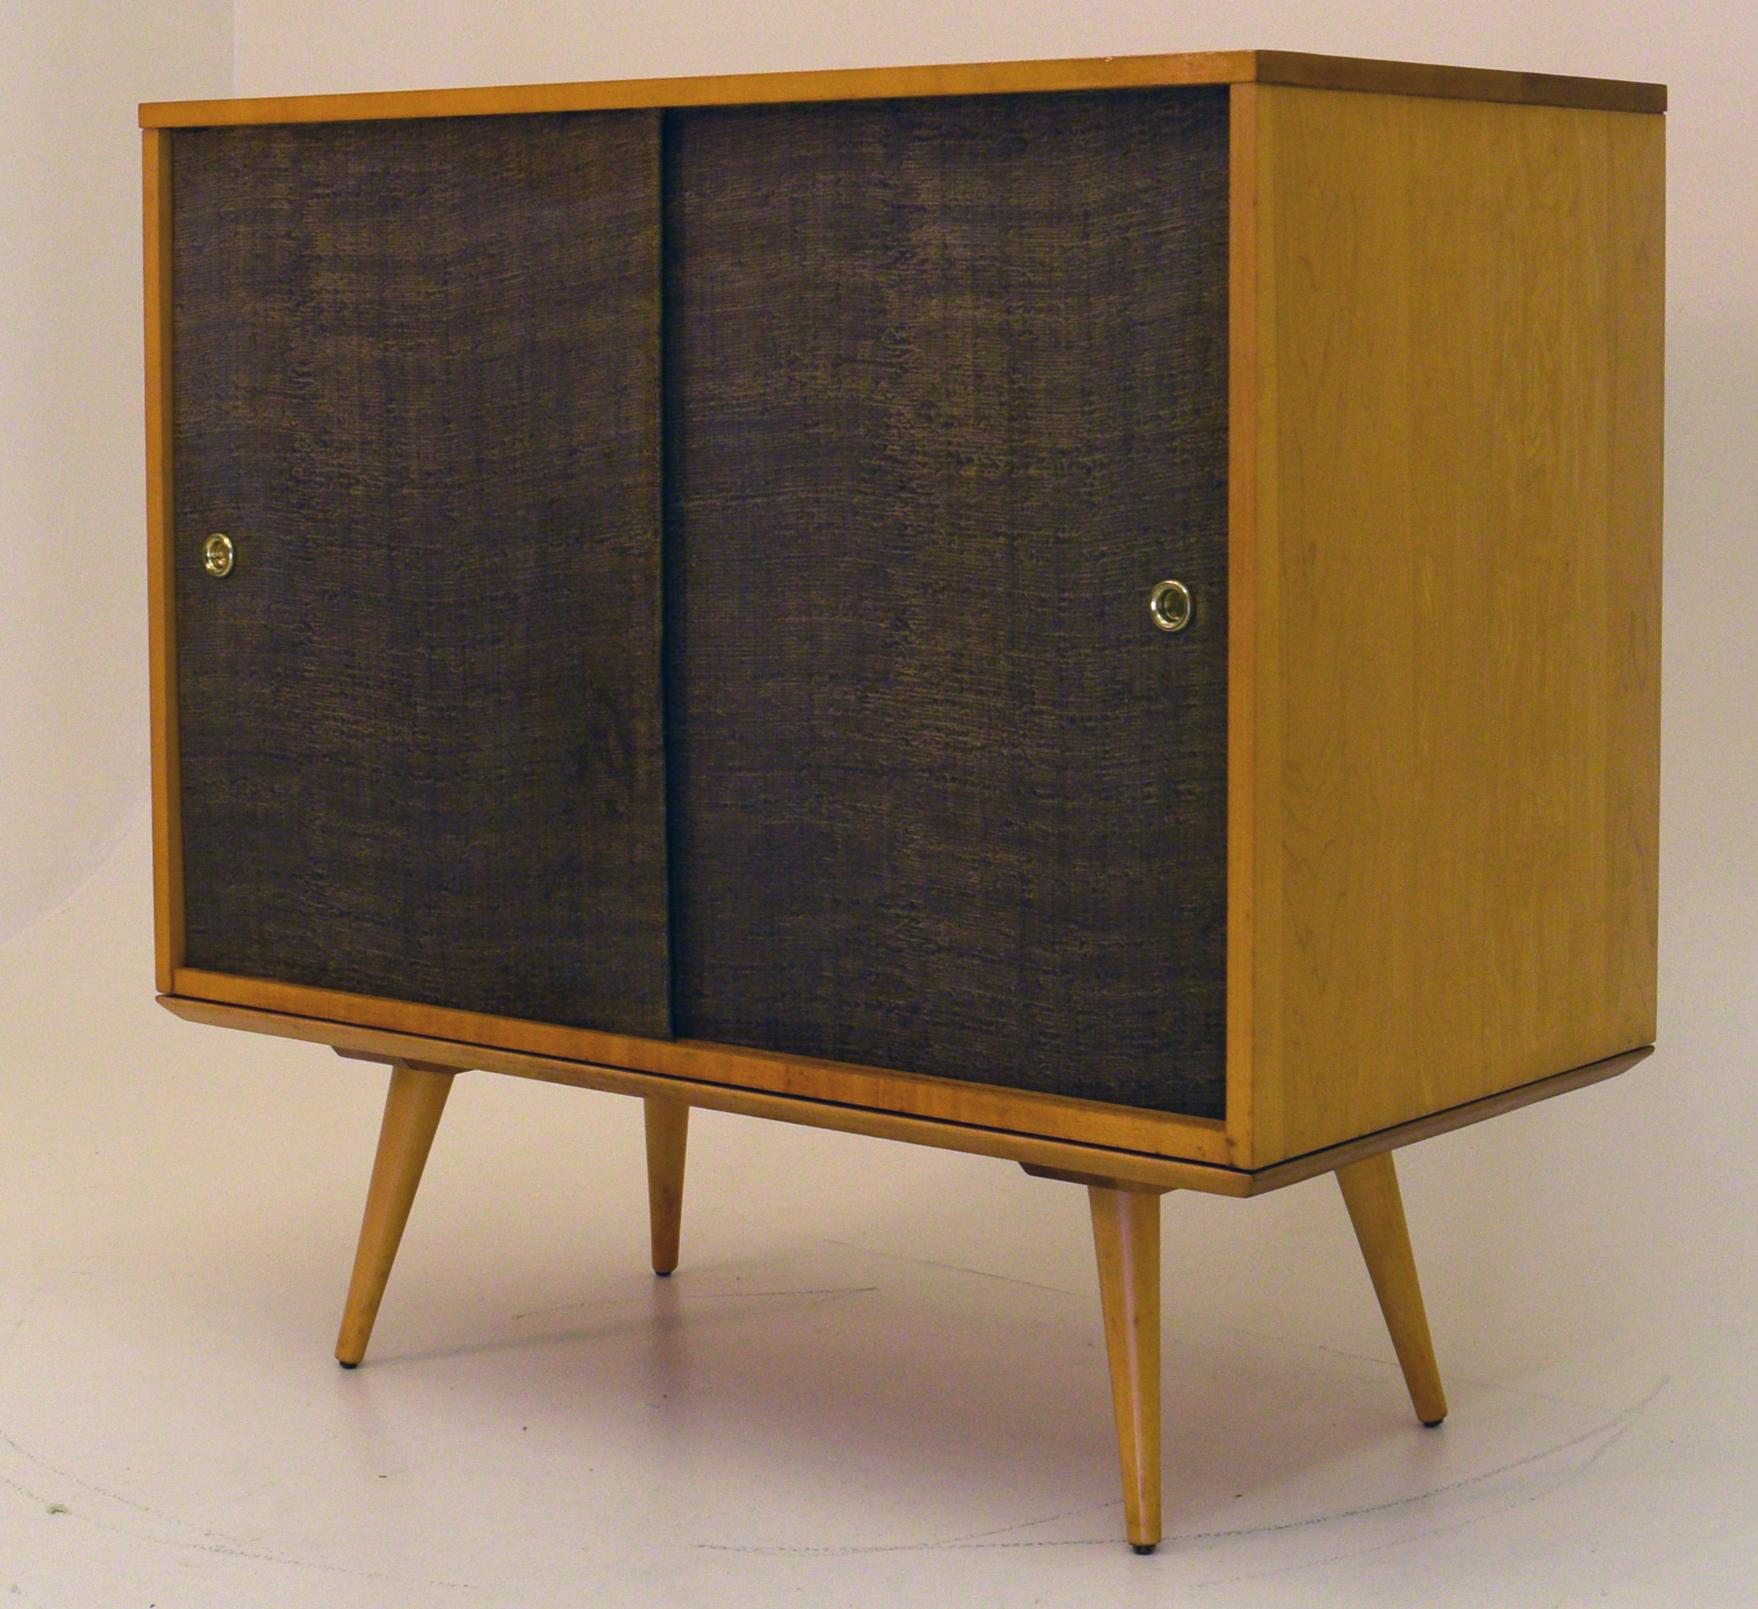 American 3 Piece Petite Modular Upright or Cabinet by Paul McCobb